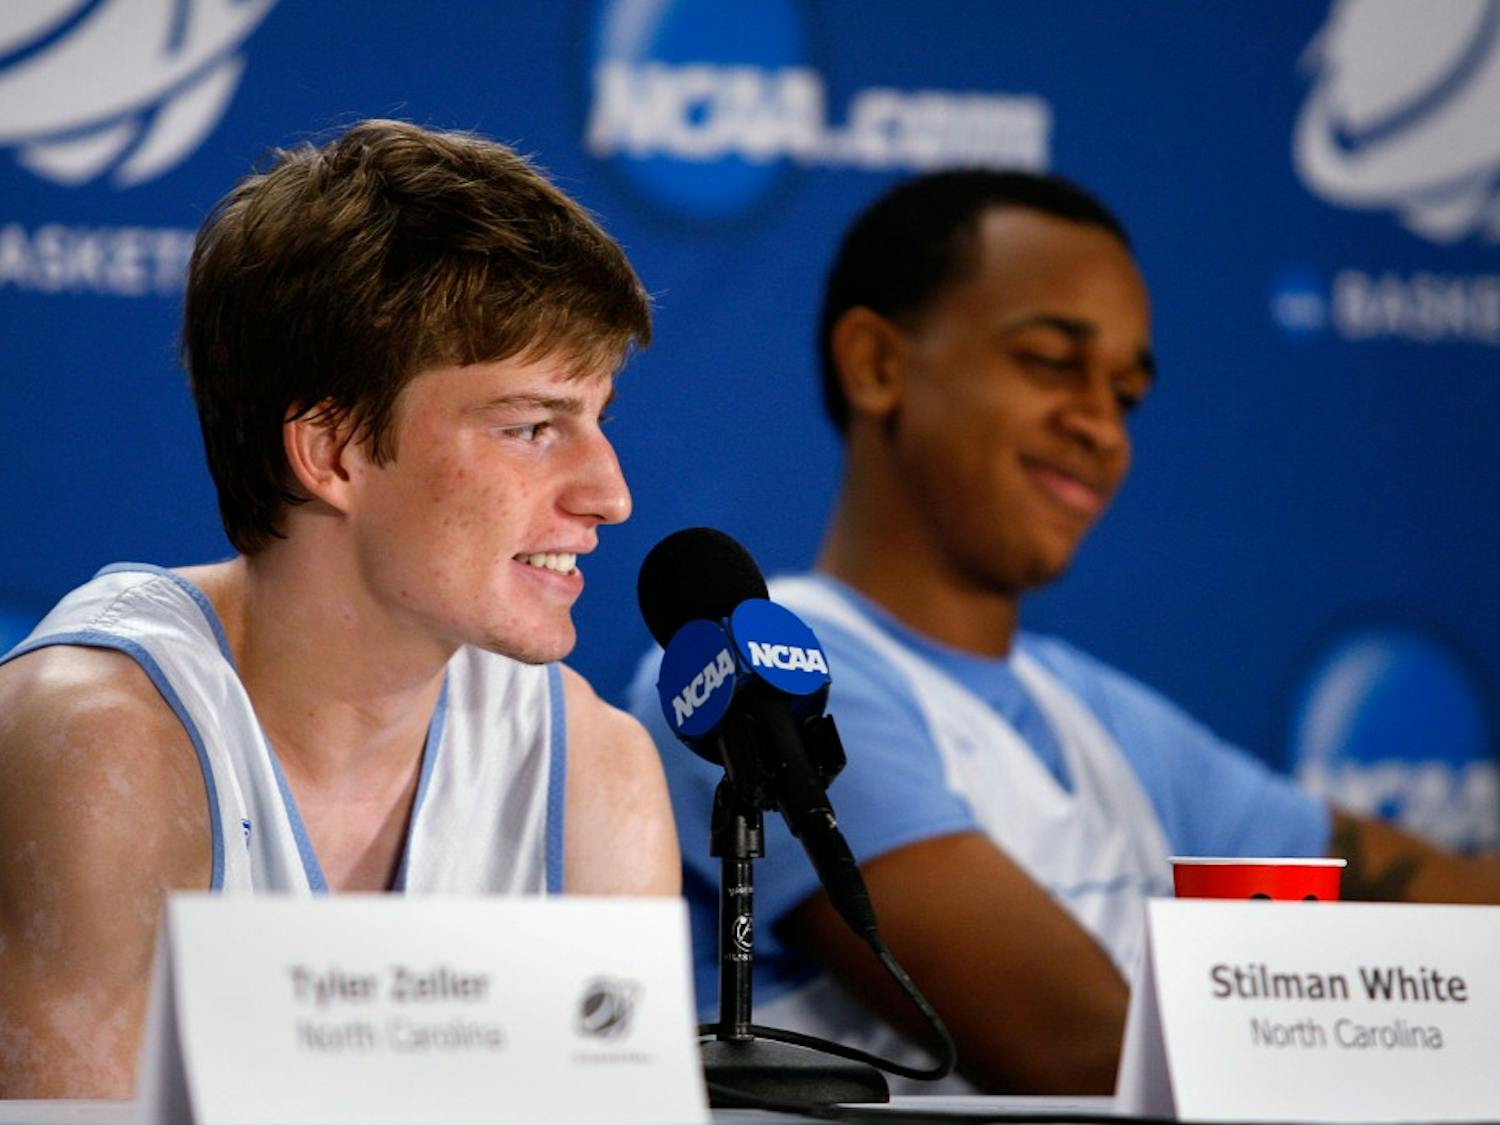 UNC guard Stilman White answers a question during a press conference Saturday. UNC will take on Kansas in the Elite 8 round of the NCAA Tournament on Sunday at the Edward Jones Dome in St. Louis. 